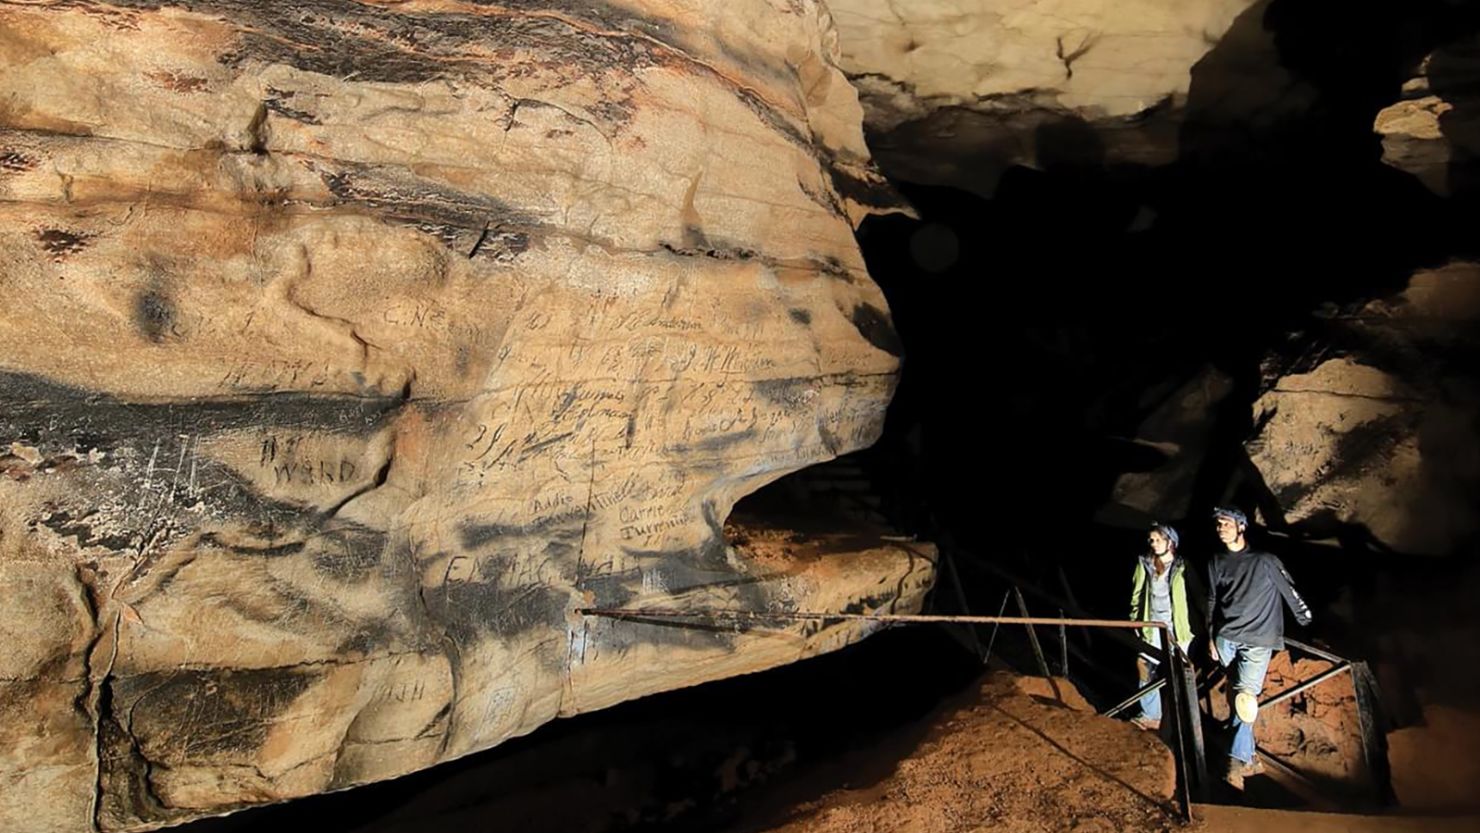 Scholars first learned of the cave writings in 2006, but didn't gain full access until the caves changed ownership in 2015, co-author Jan Simek says.